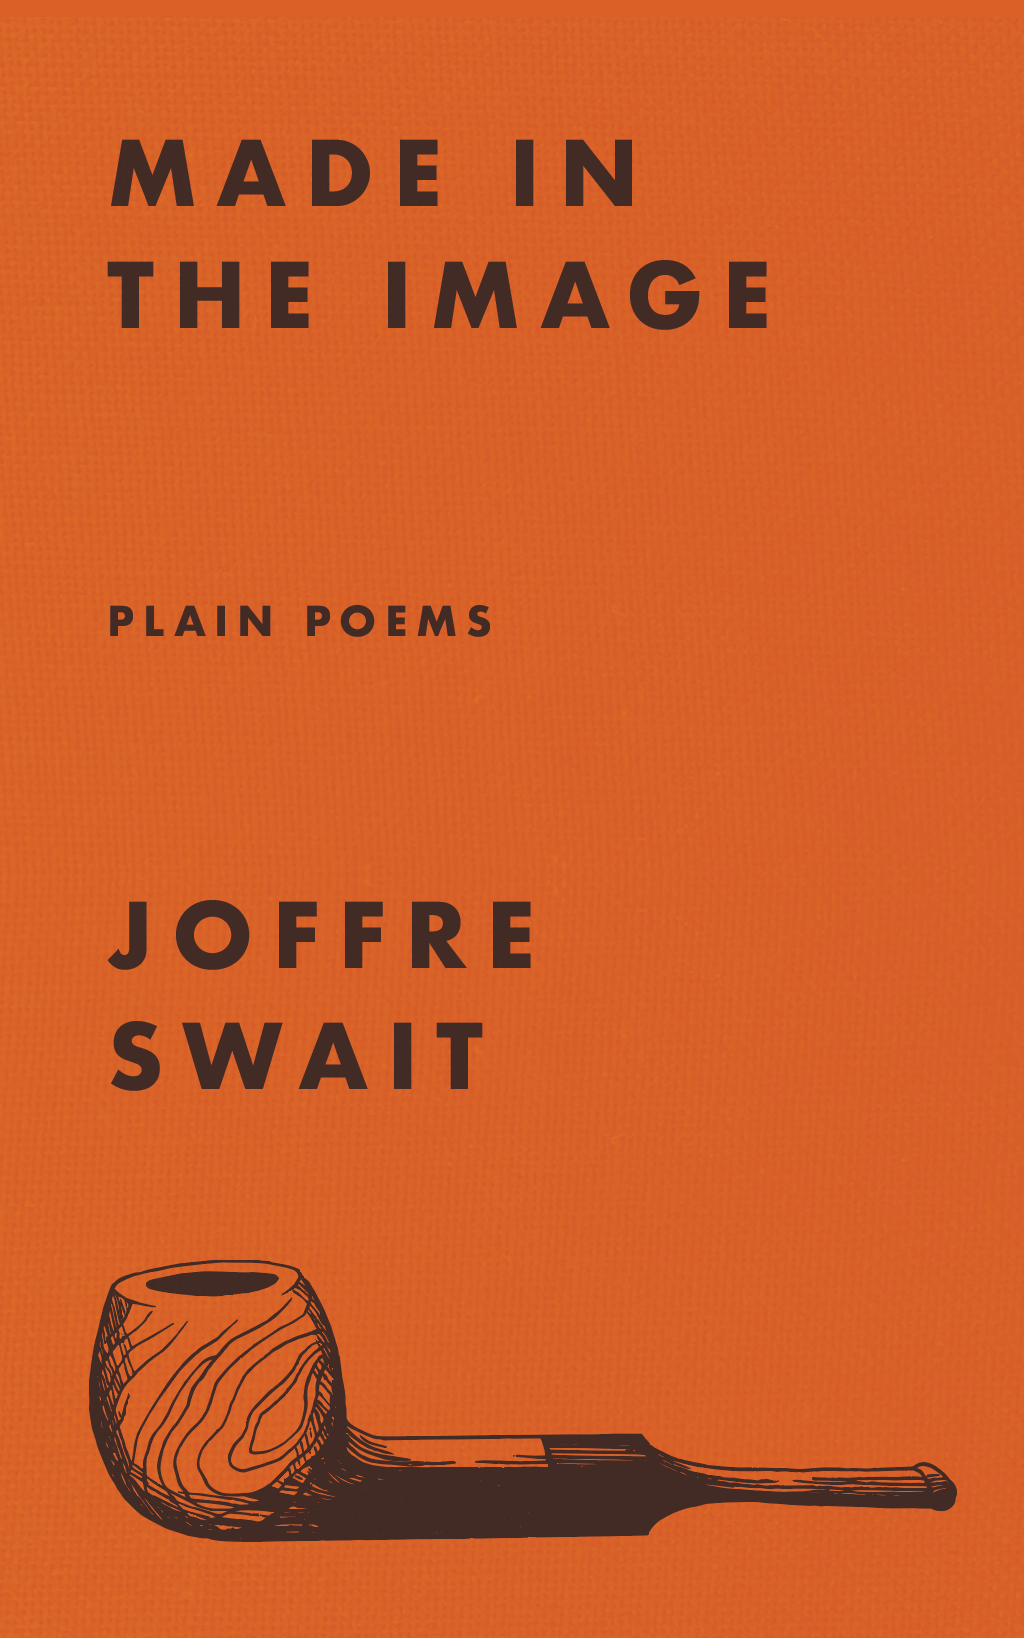 Made in the Image: Plain Poems